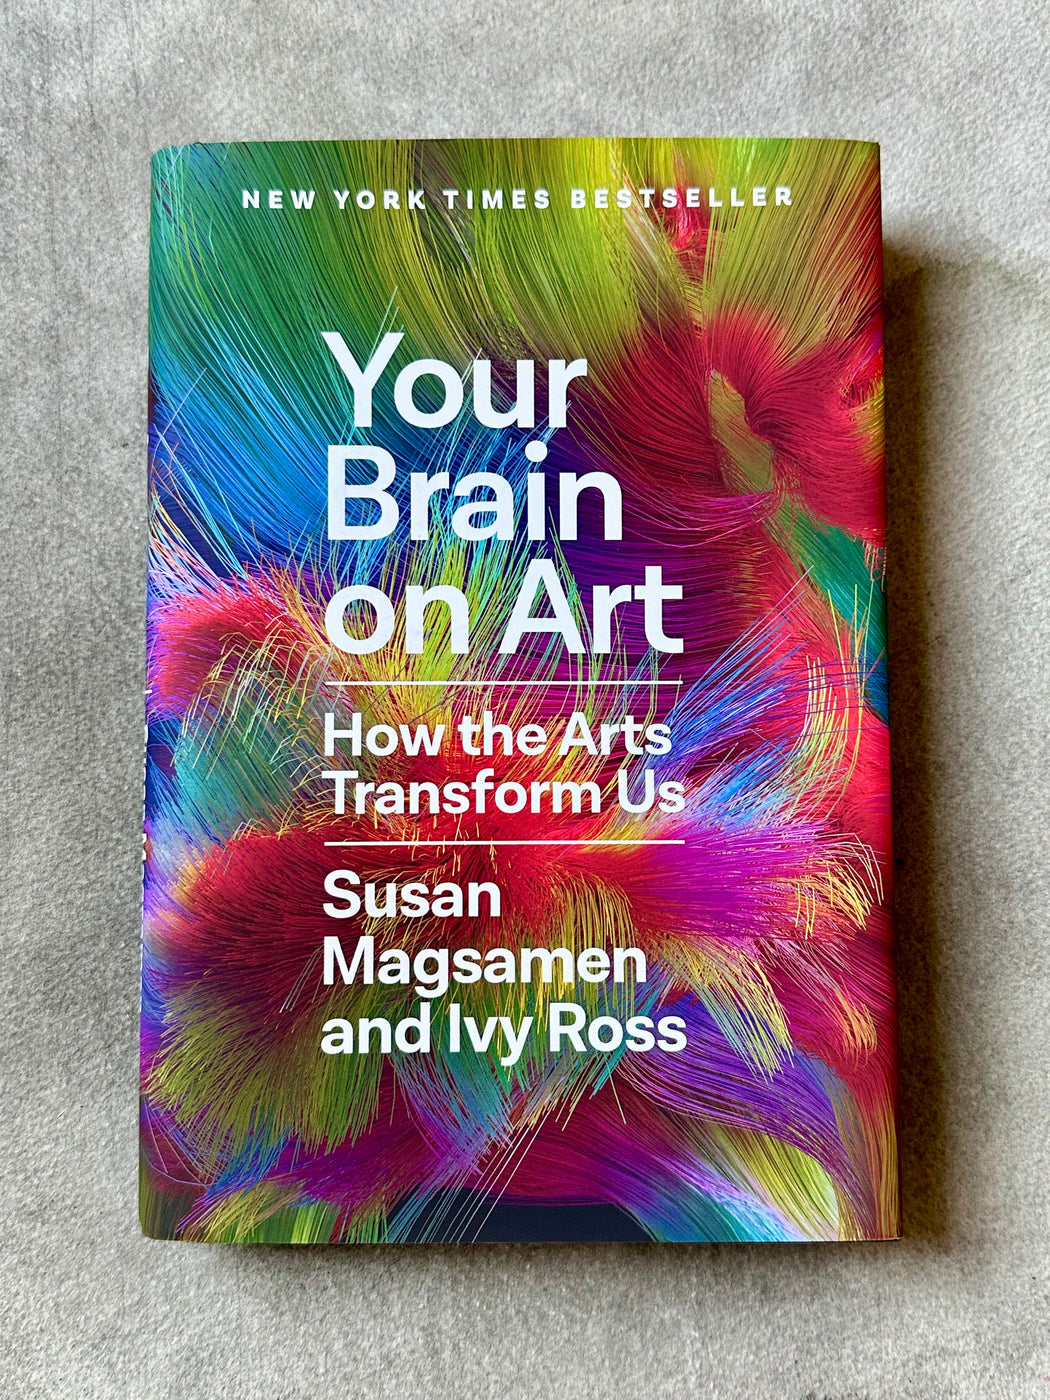 "Your Brain on Art" by Susan Magsamen and Ivy Ross